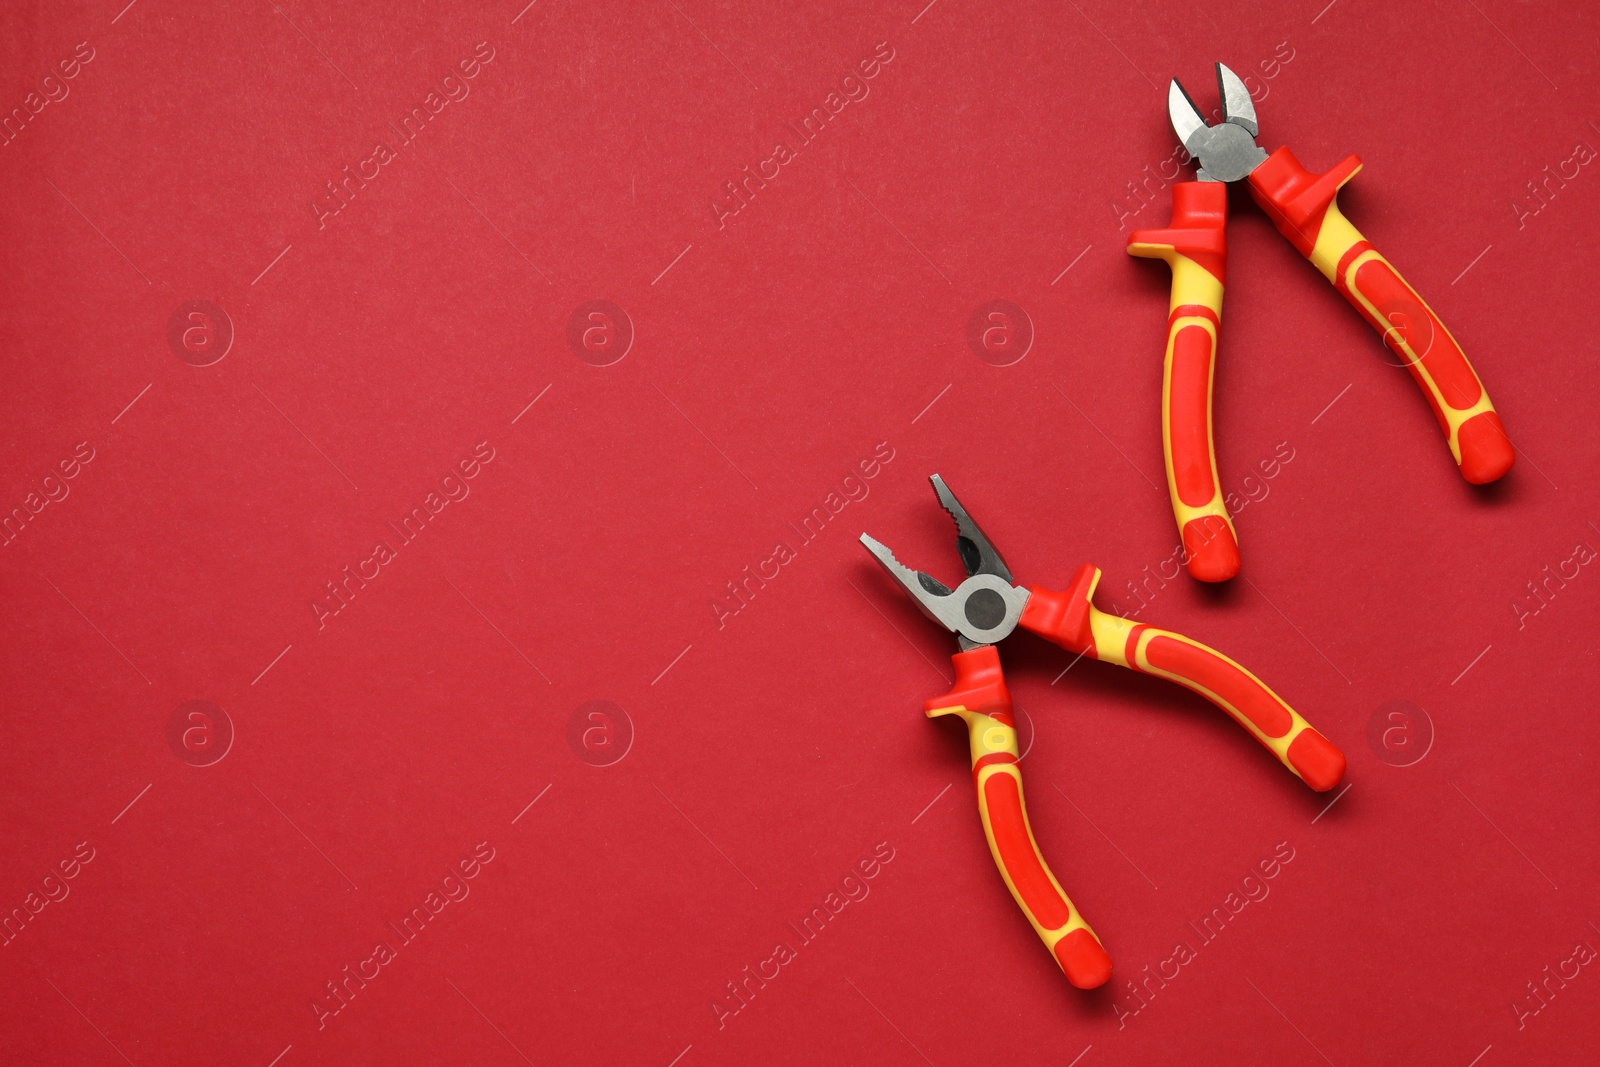 Photo of Pliers on red background, flat lay. Space for text